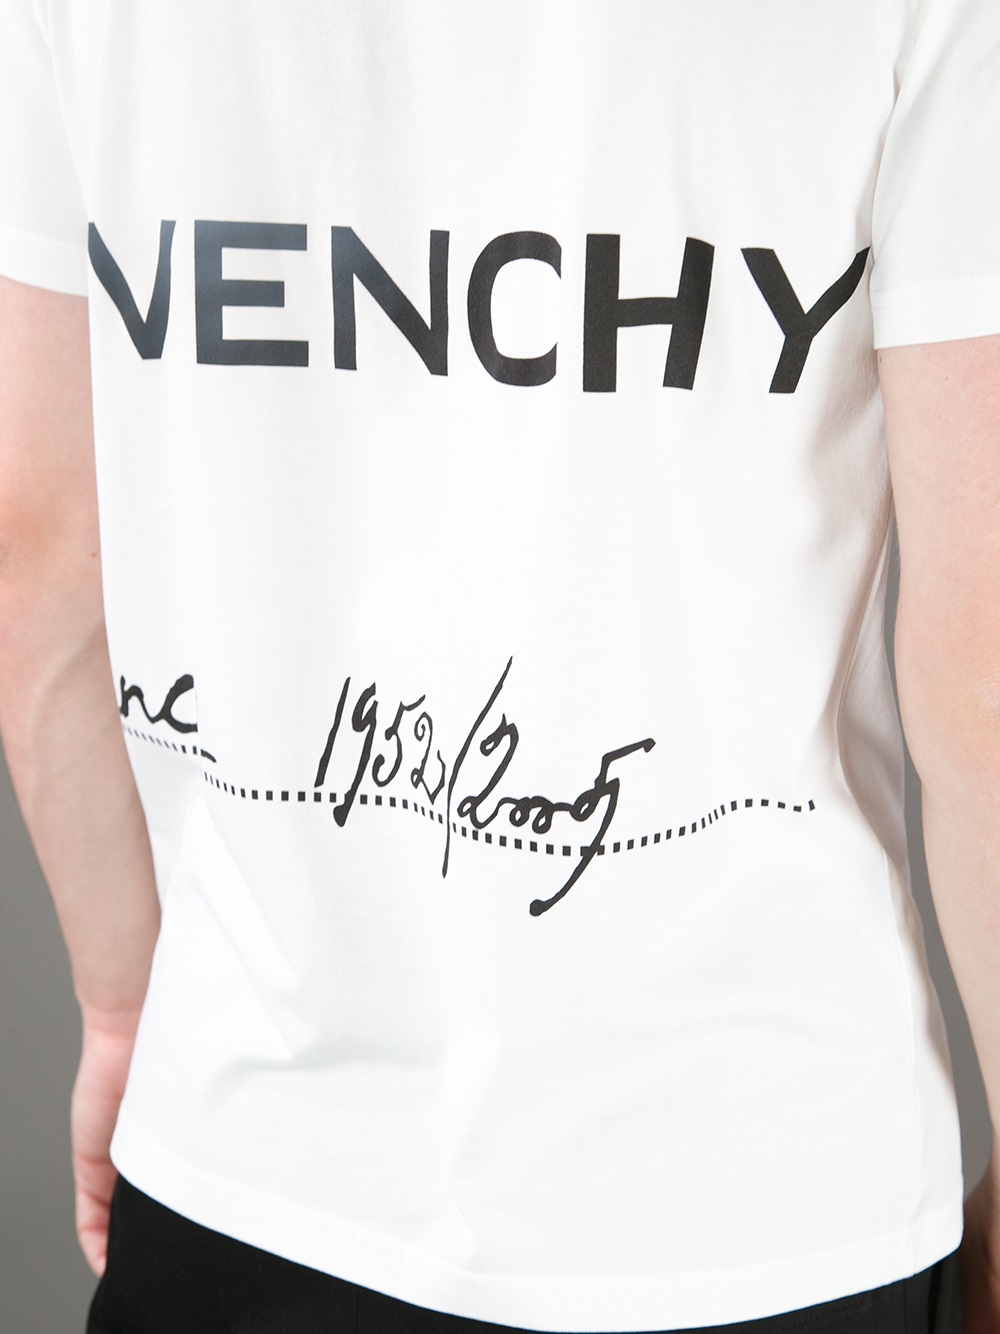 Givenchy t shirt mens price clearance westfield